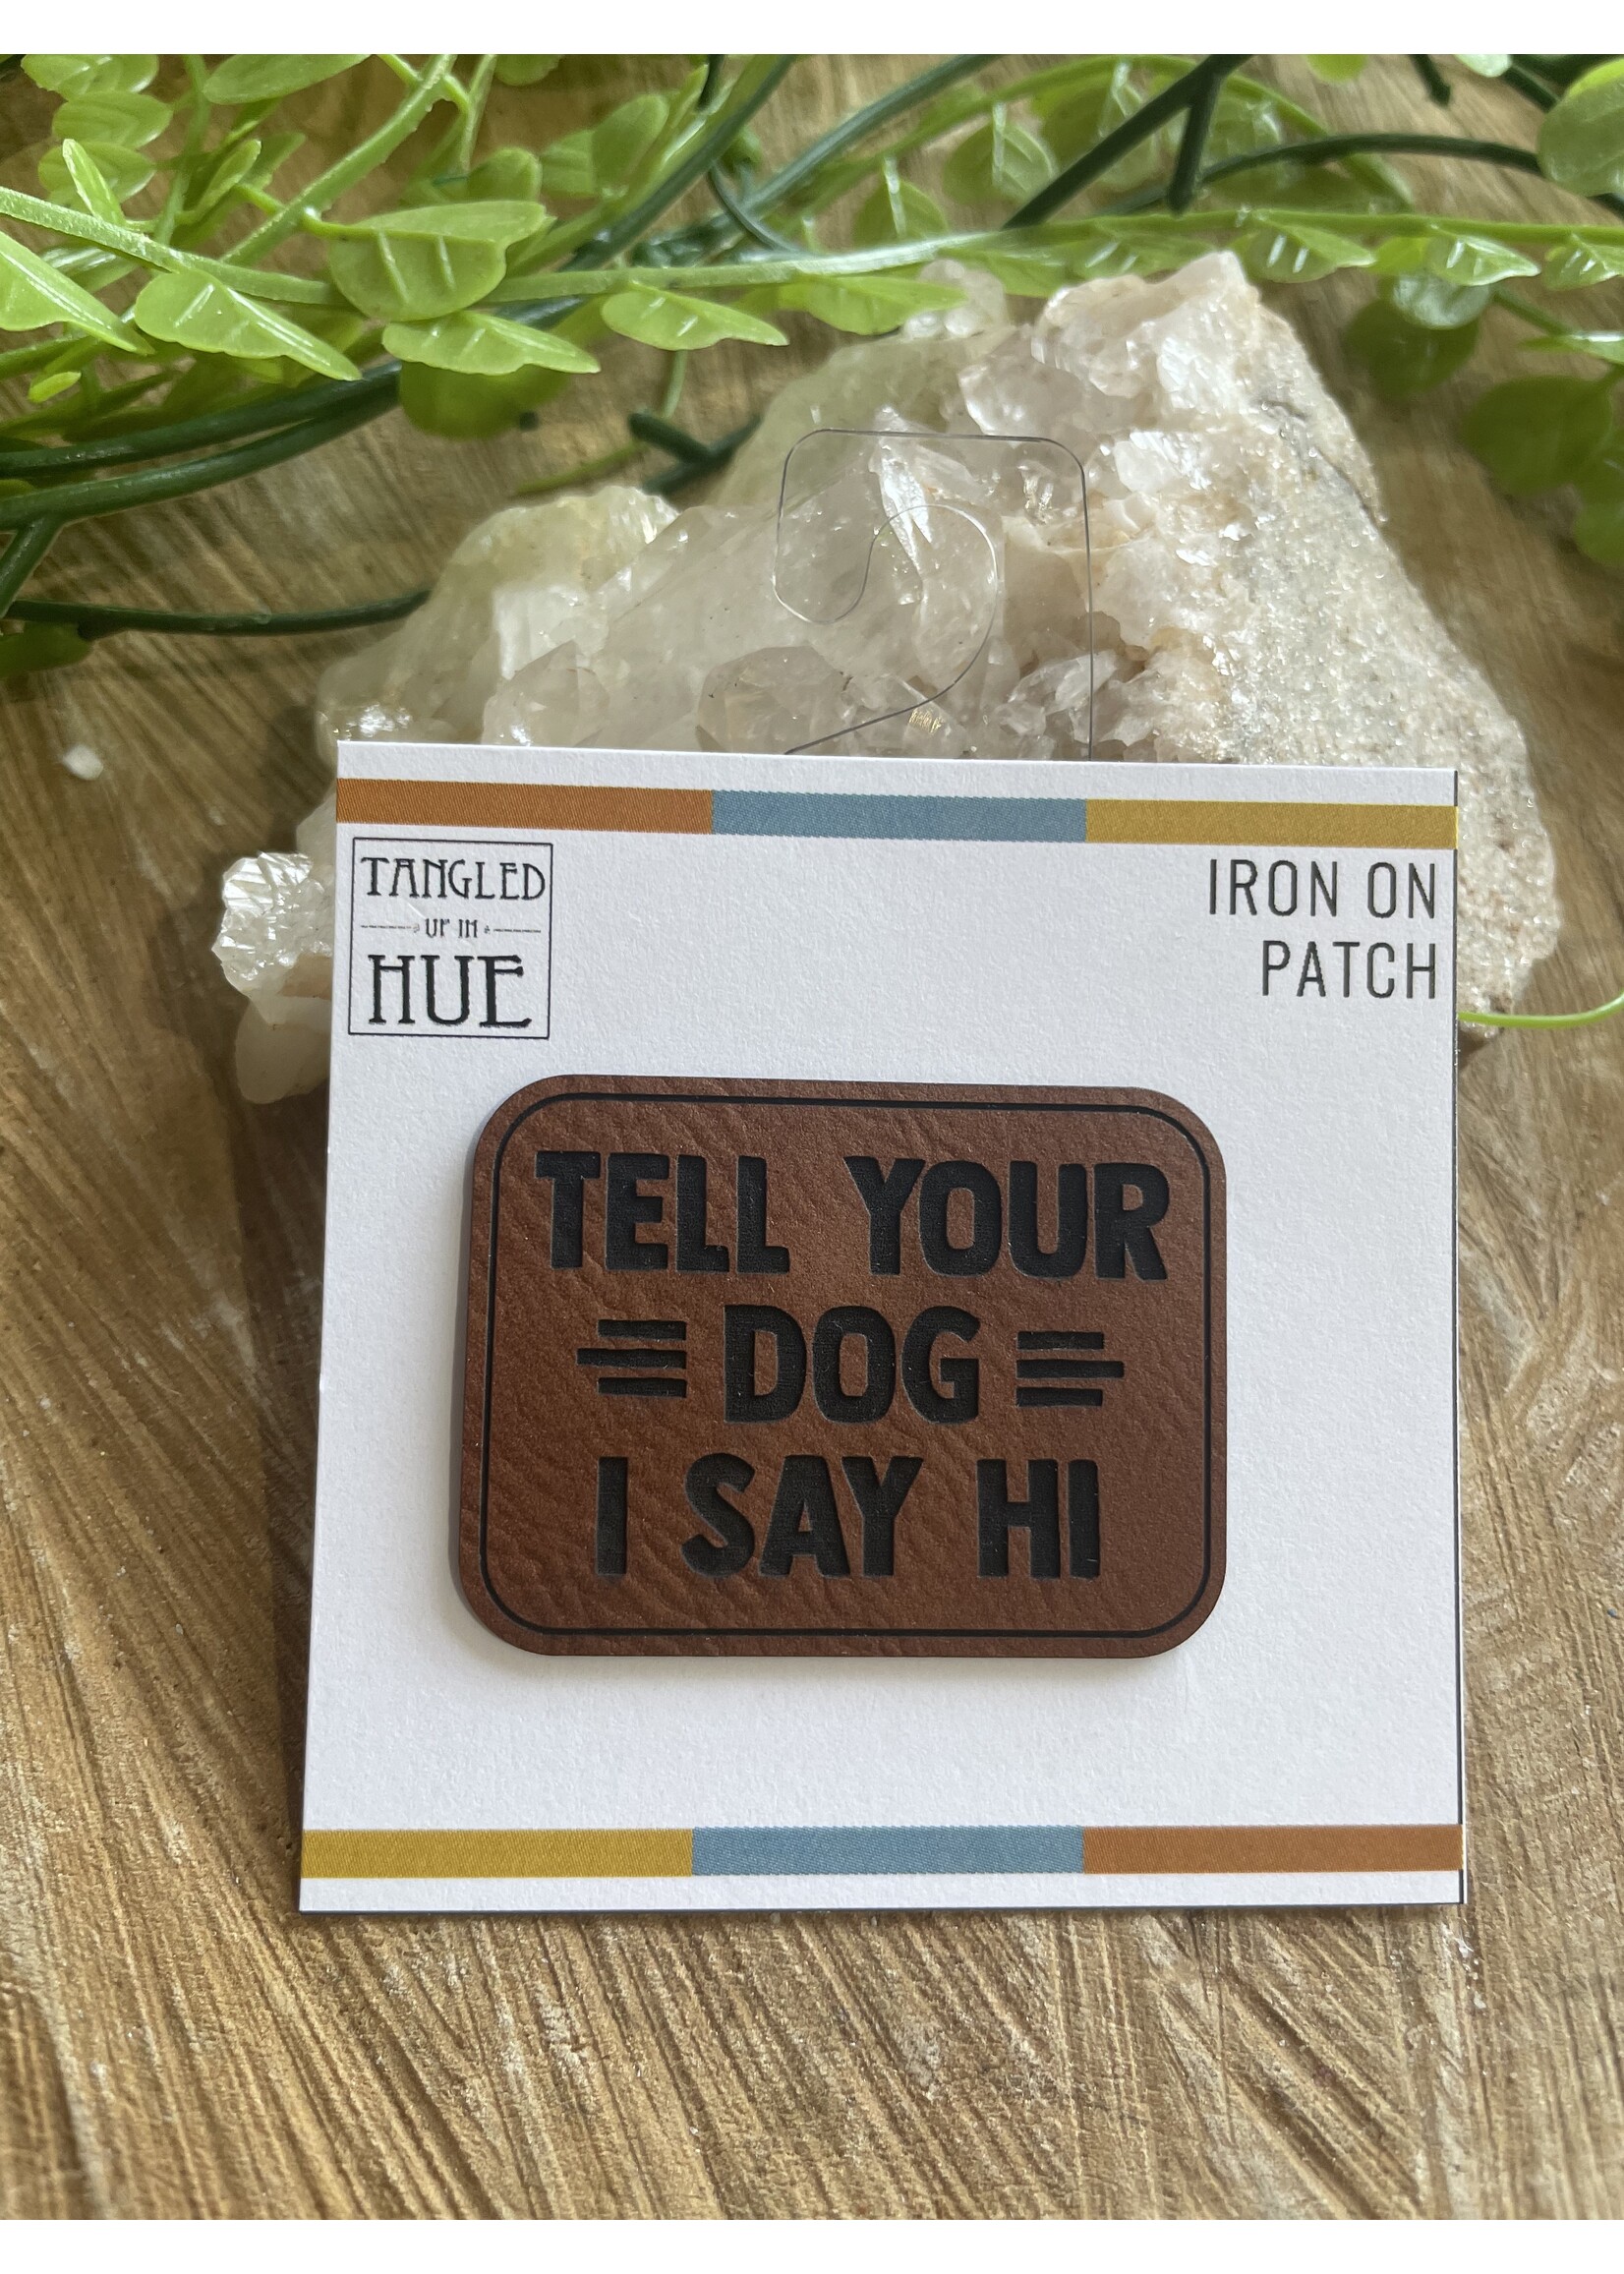 Tangled Up In Hue Leather Patch - Tell Your Dog I Say Hi